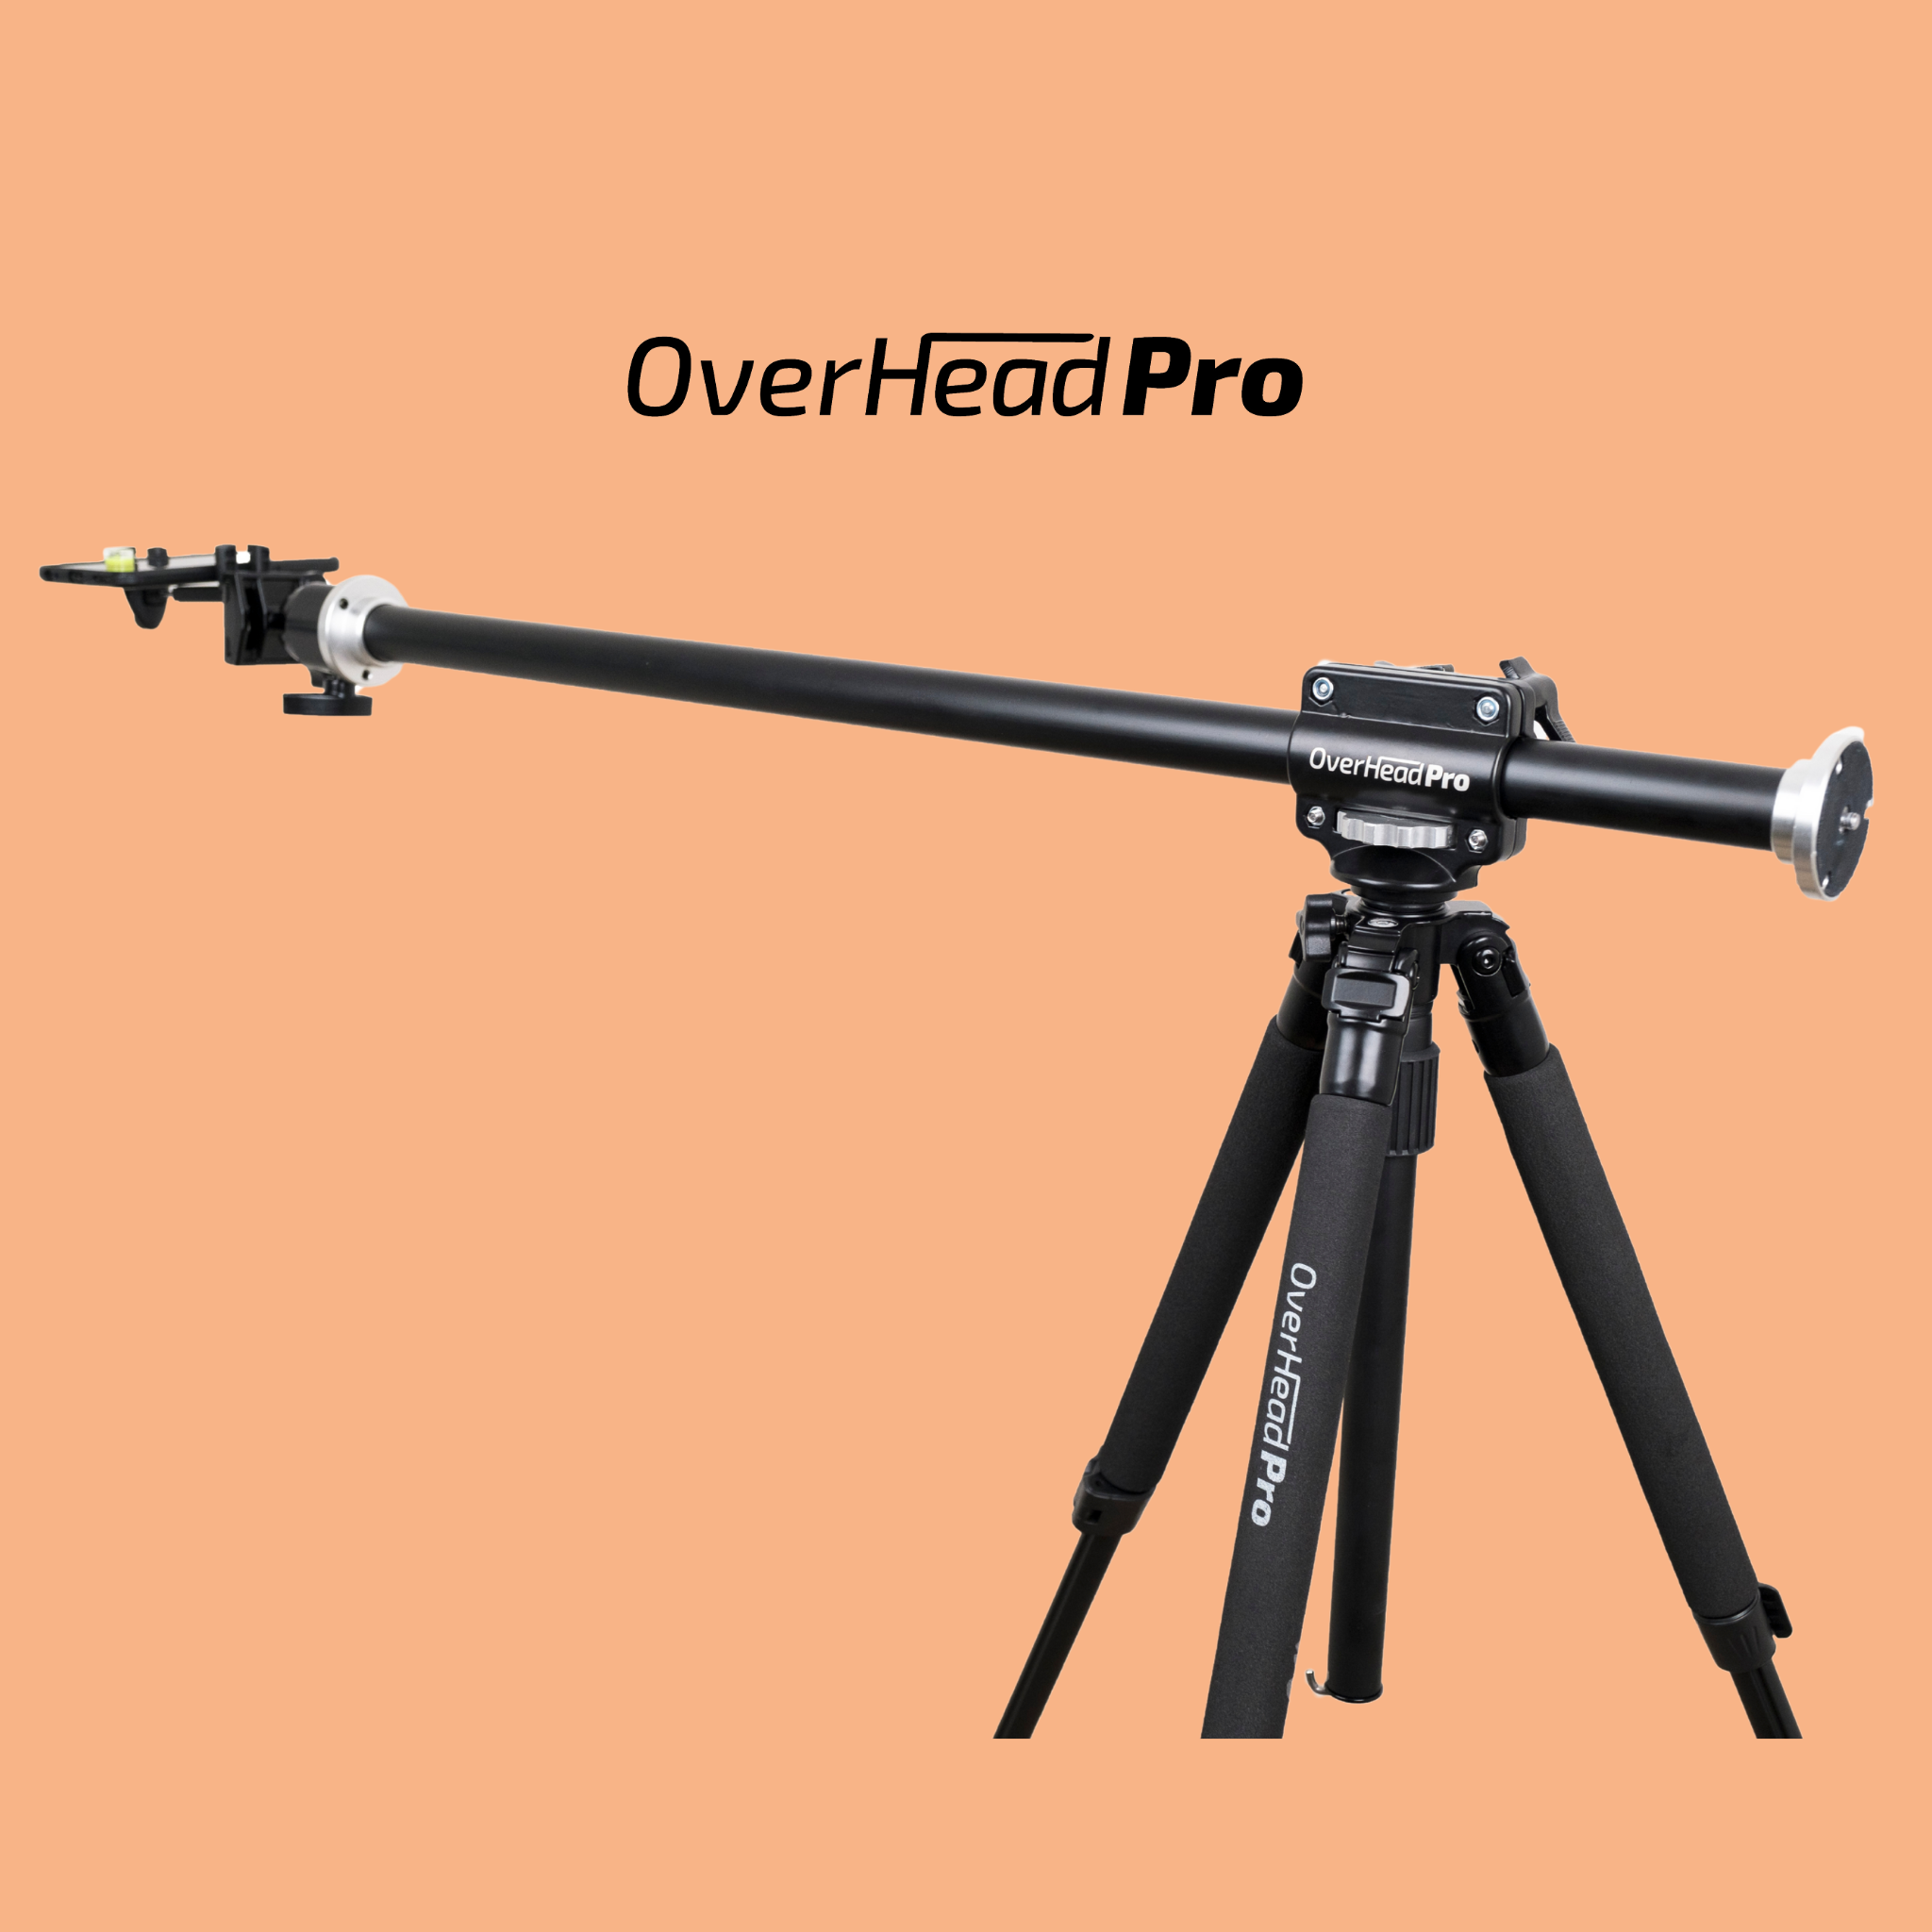 OverHead Pro Complete Kit for Smartphone and D